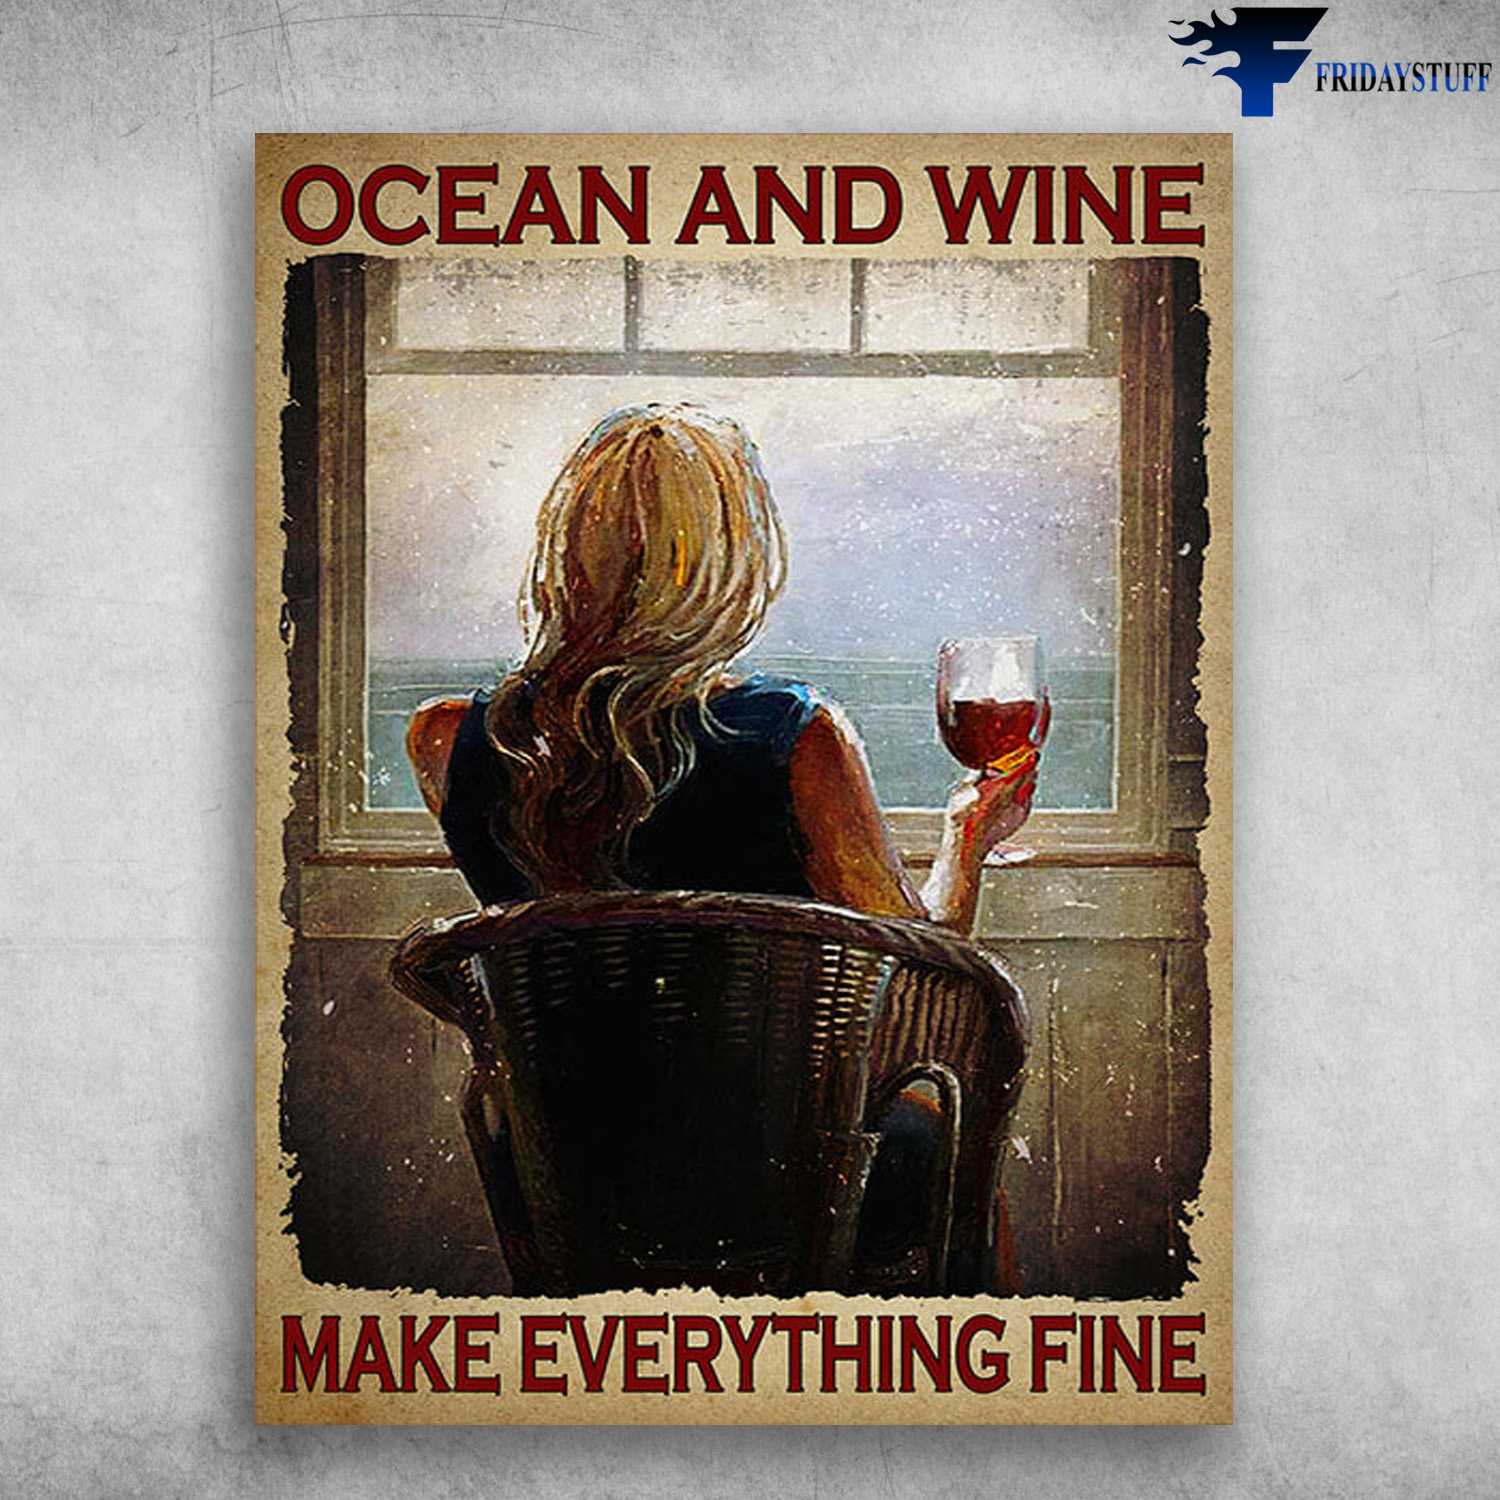 Strengt have patient Girl Loves Wine, Ocean Poster - Ocean And Wine, Make Everything Fine -  FridayStuff